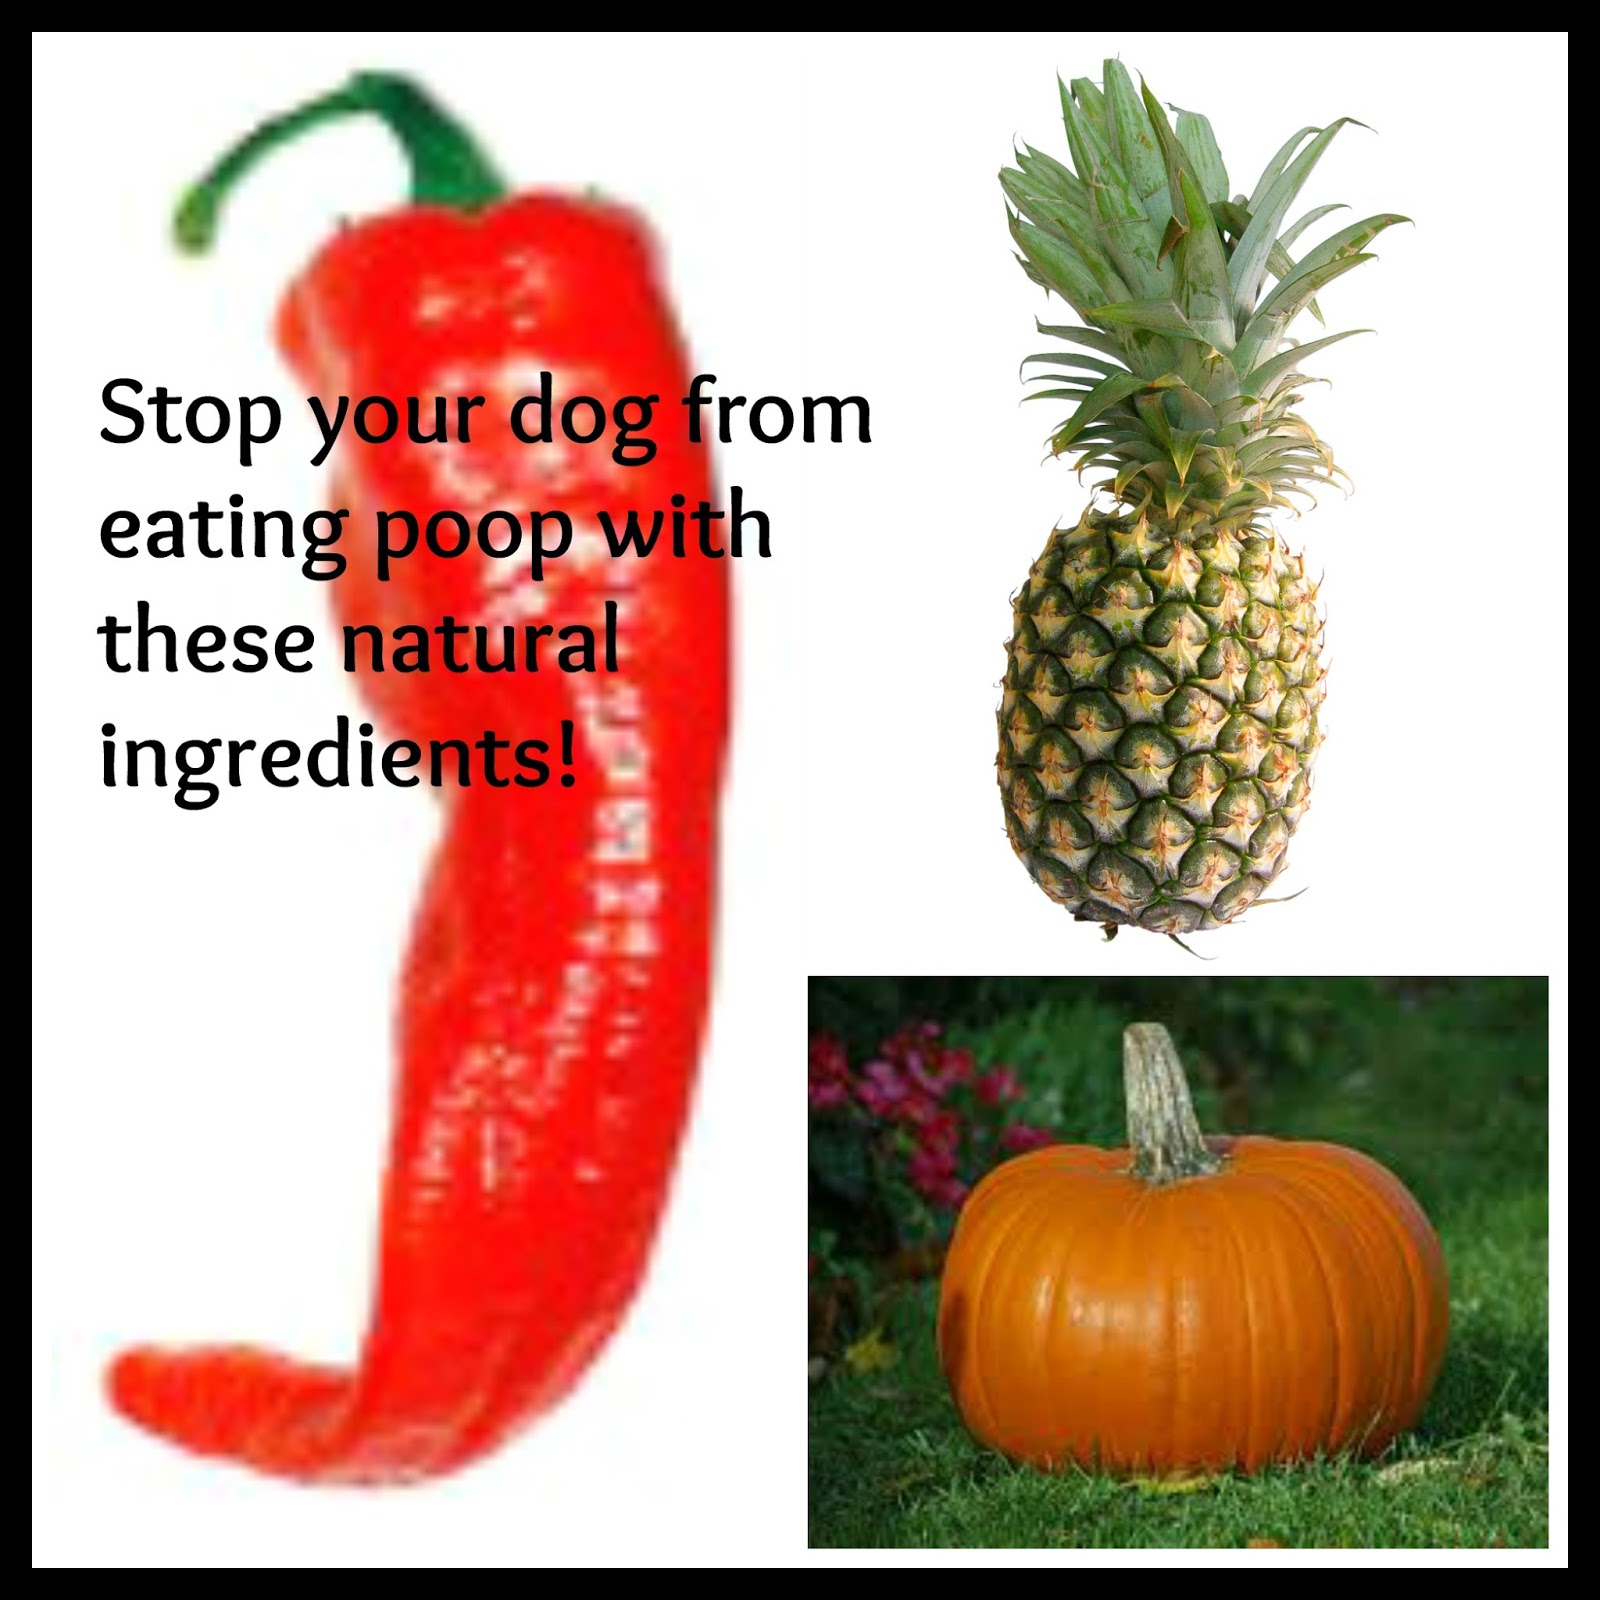 How do you stop a dog from eating poop?